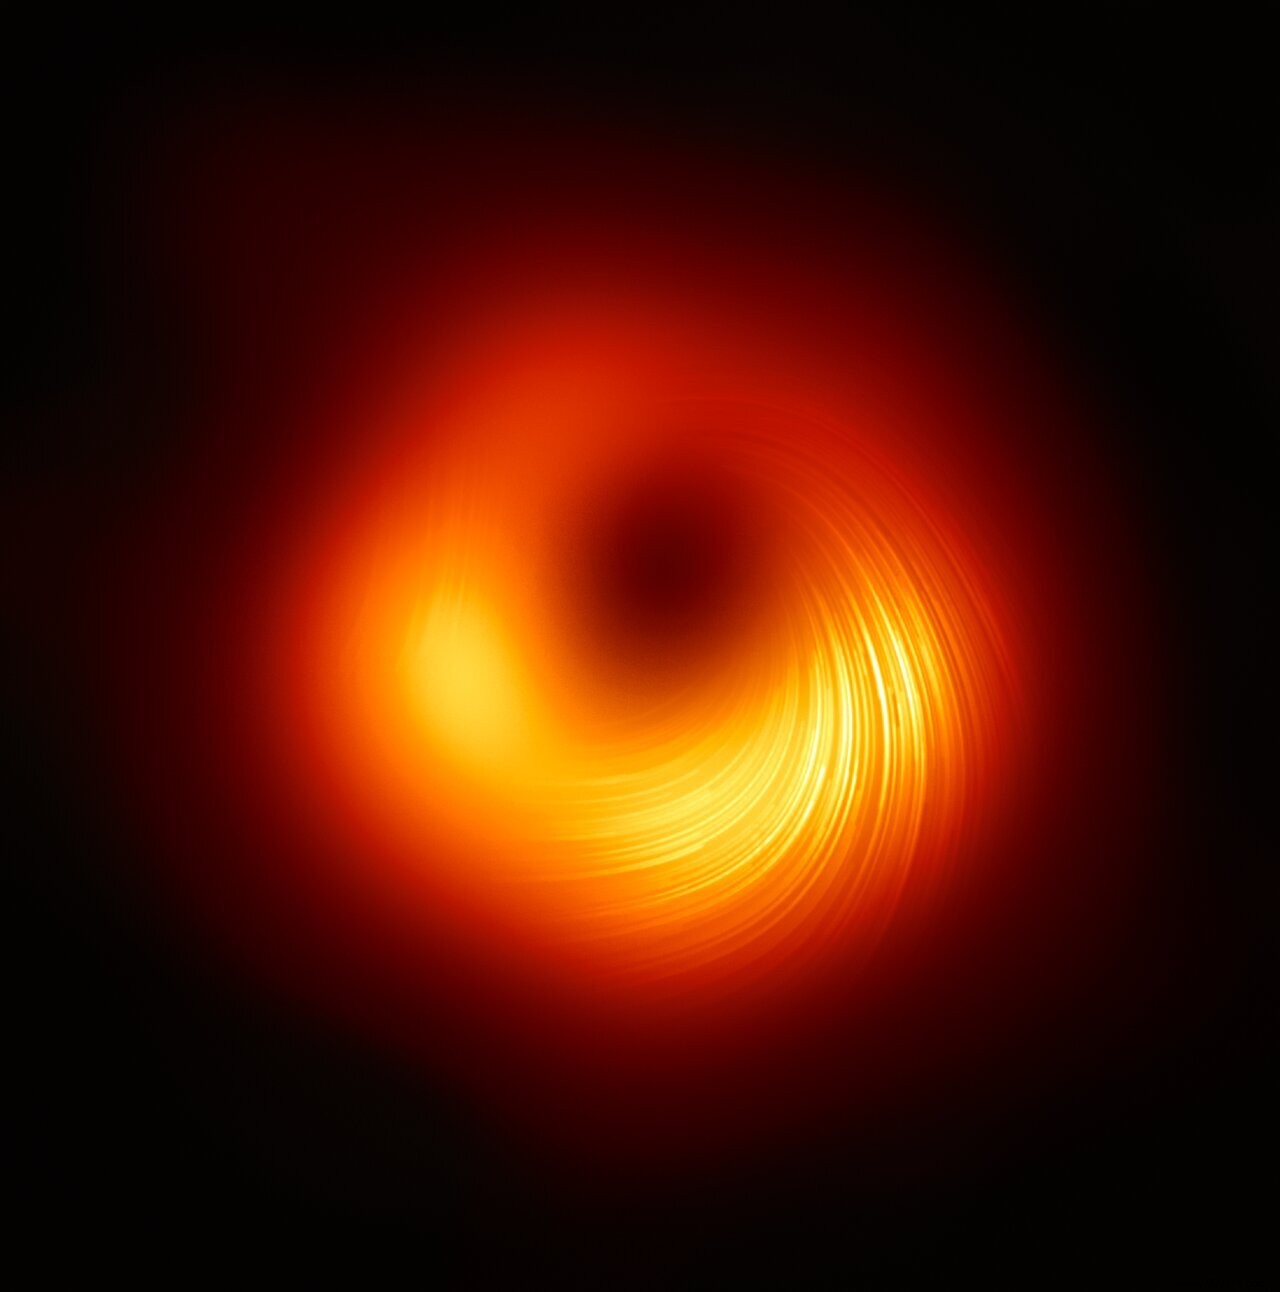 A new portrait of the most famous black hole 